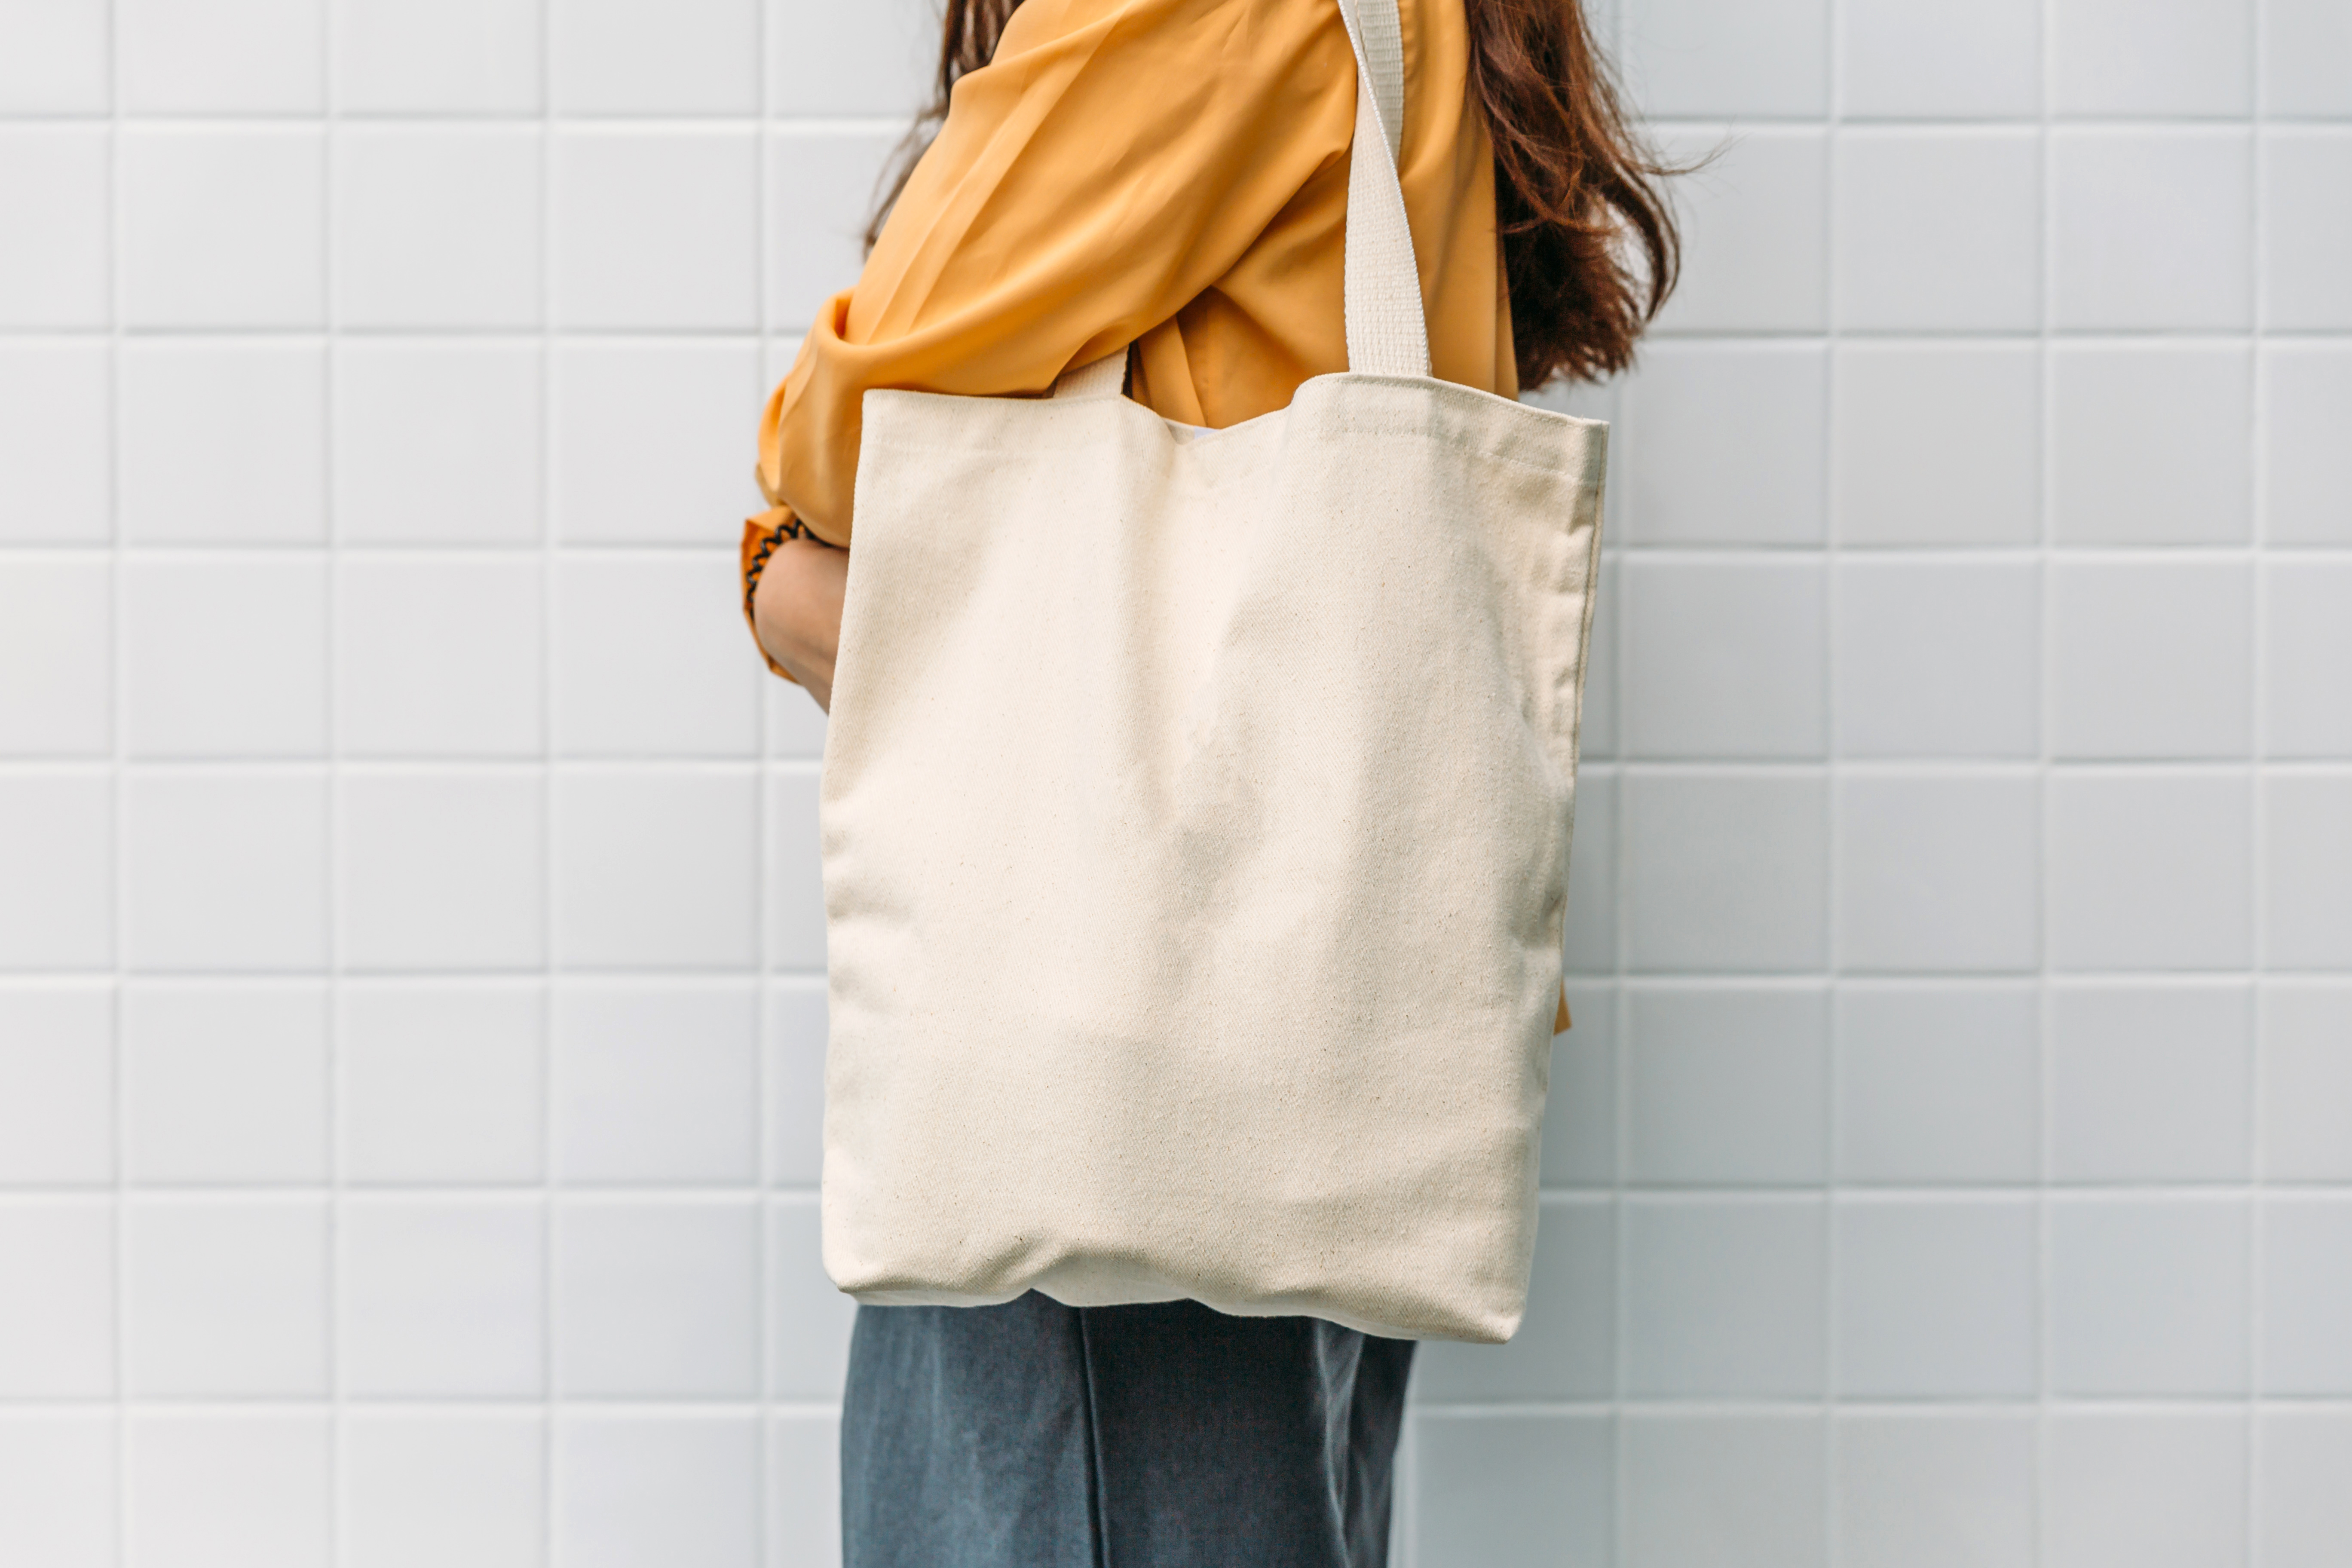 woman carrying a tote bag